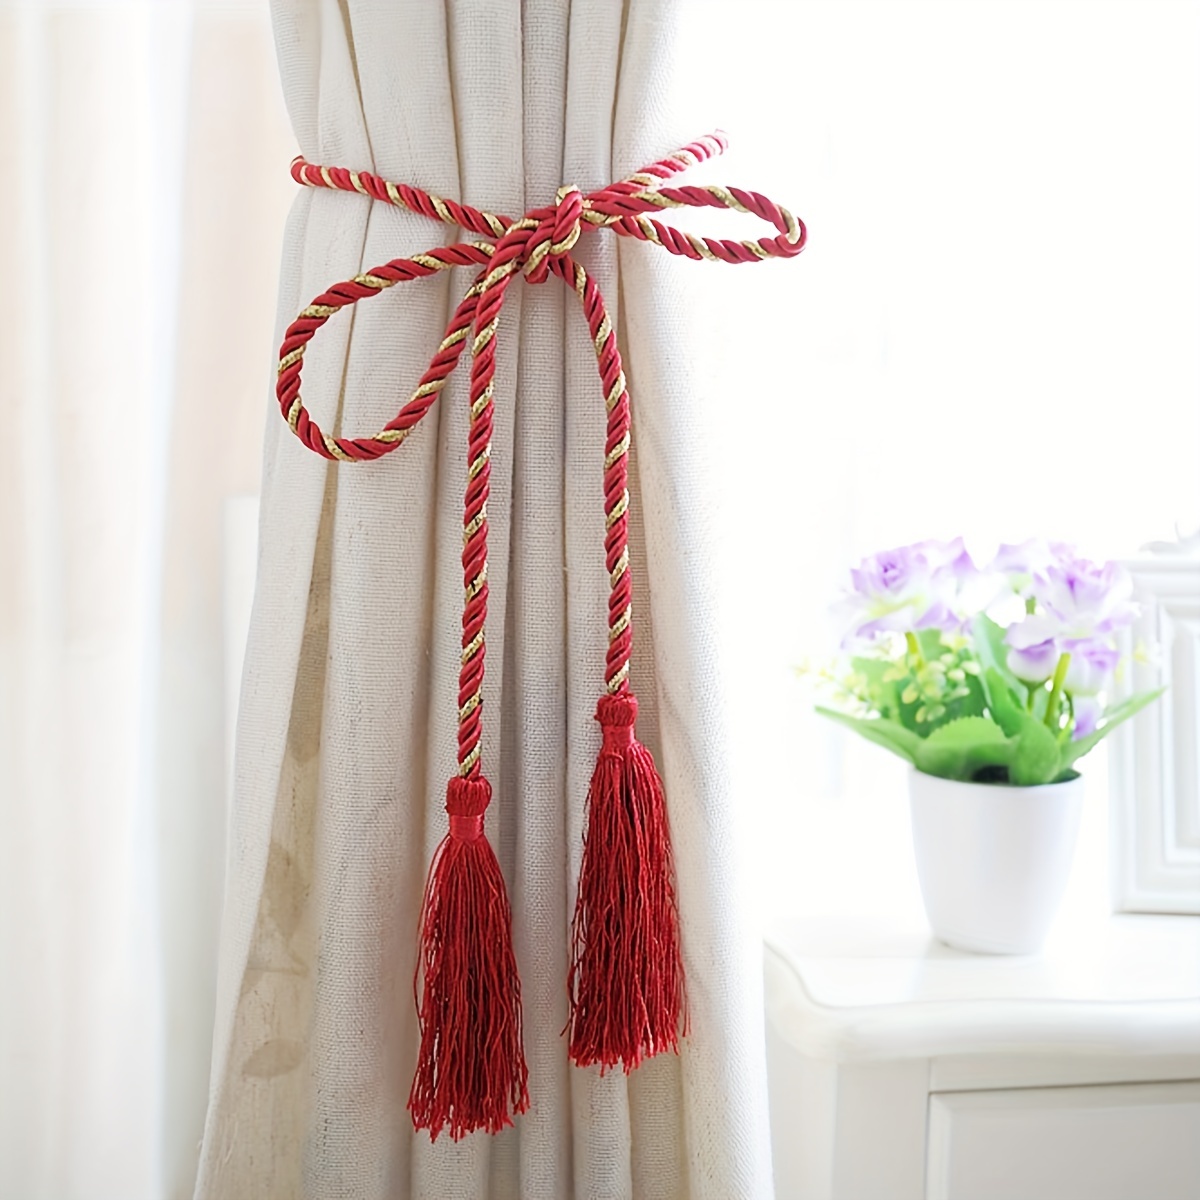 How to make curtain tie-backs